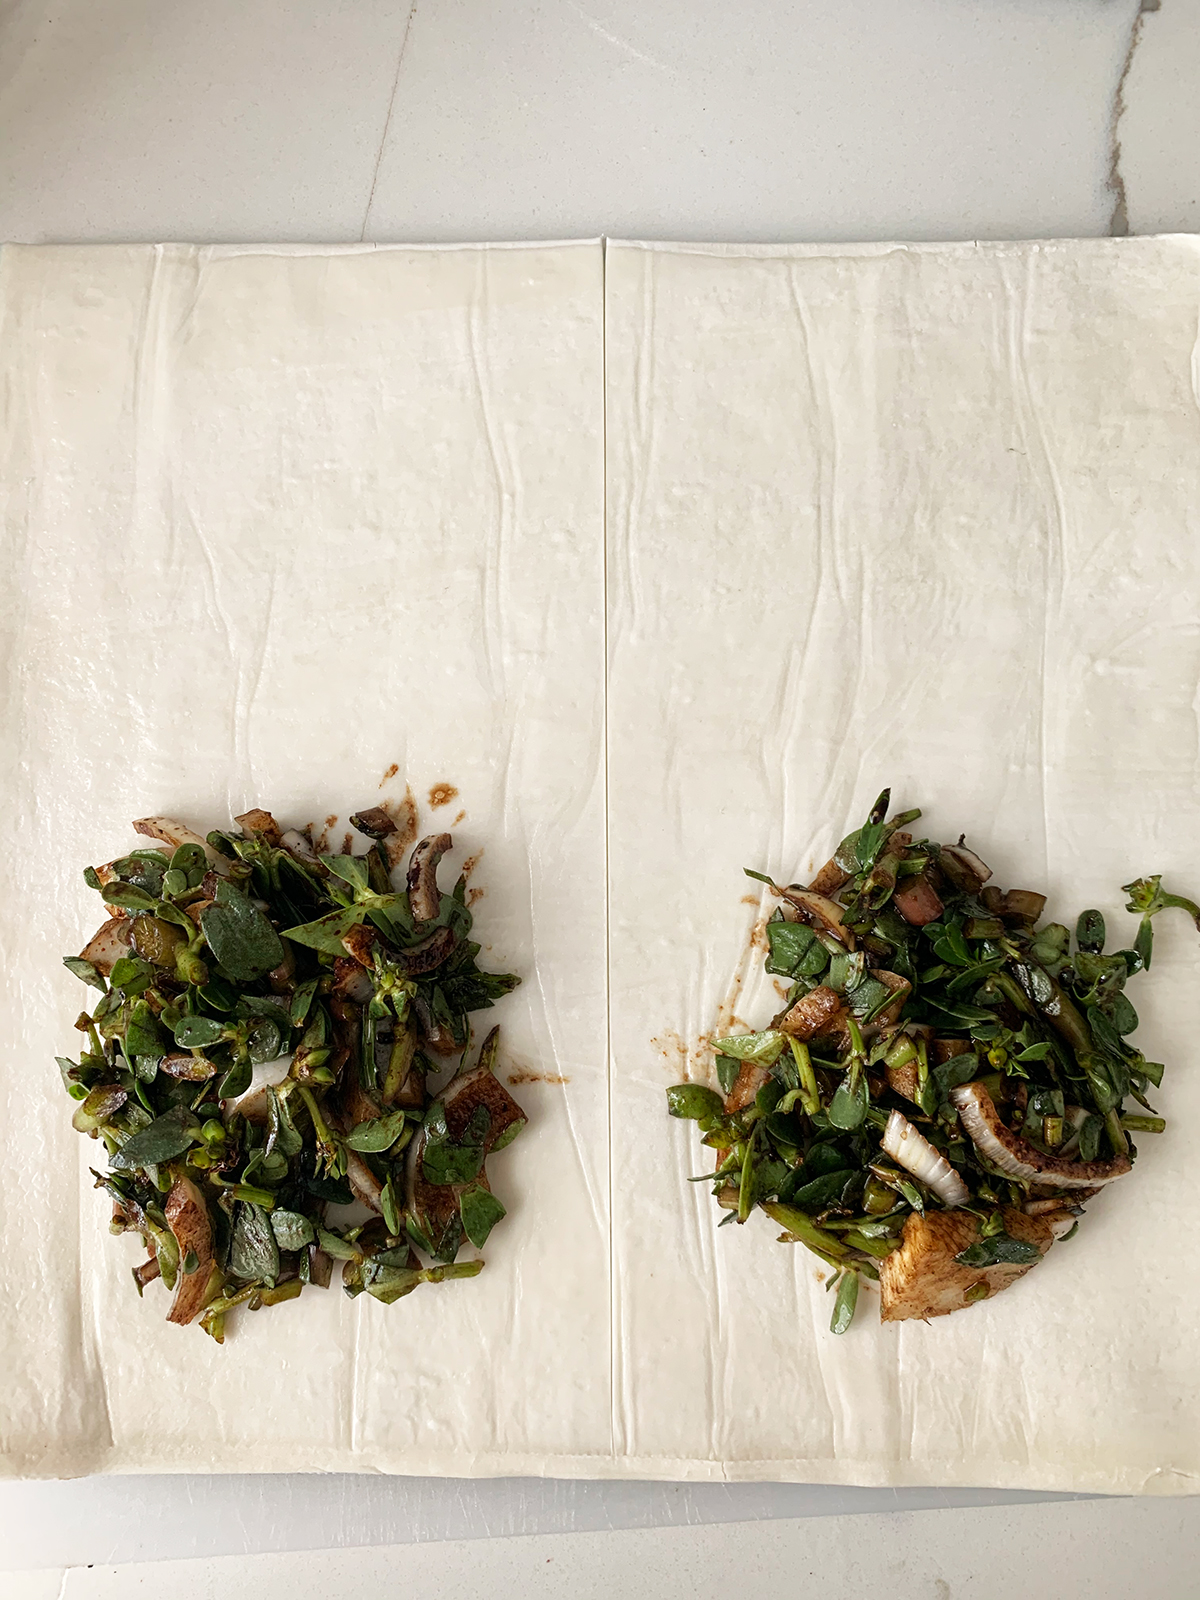 Purslane/bakleh filling placed on one edge of puff pastry sheet